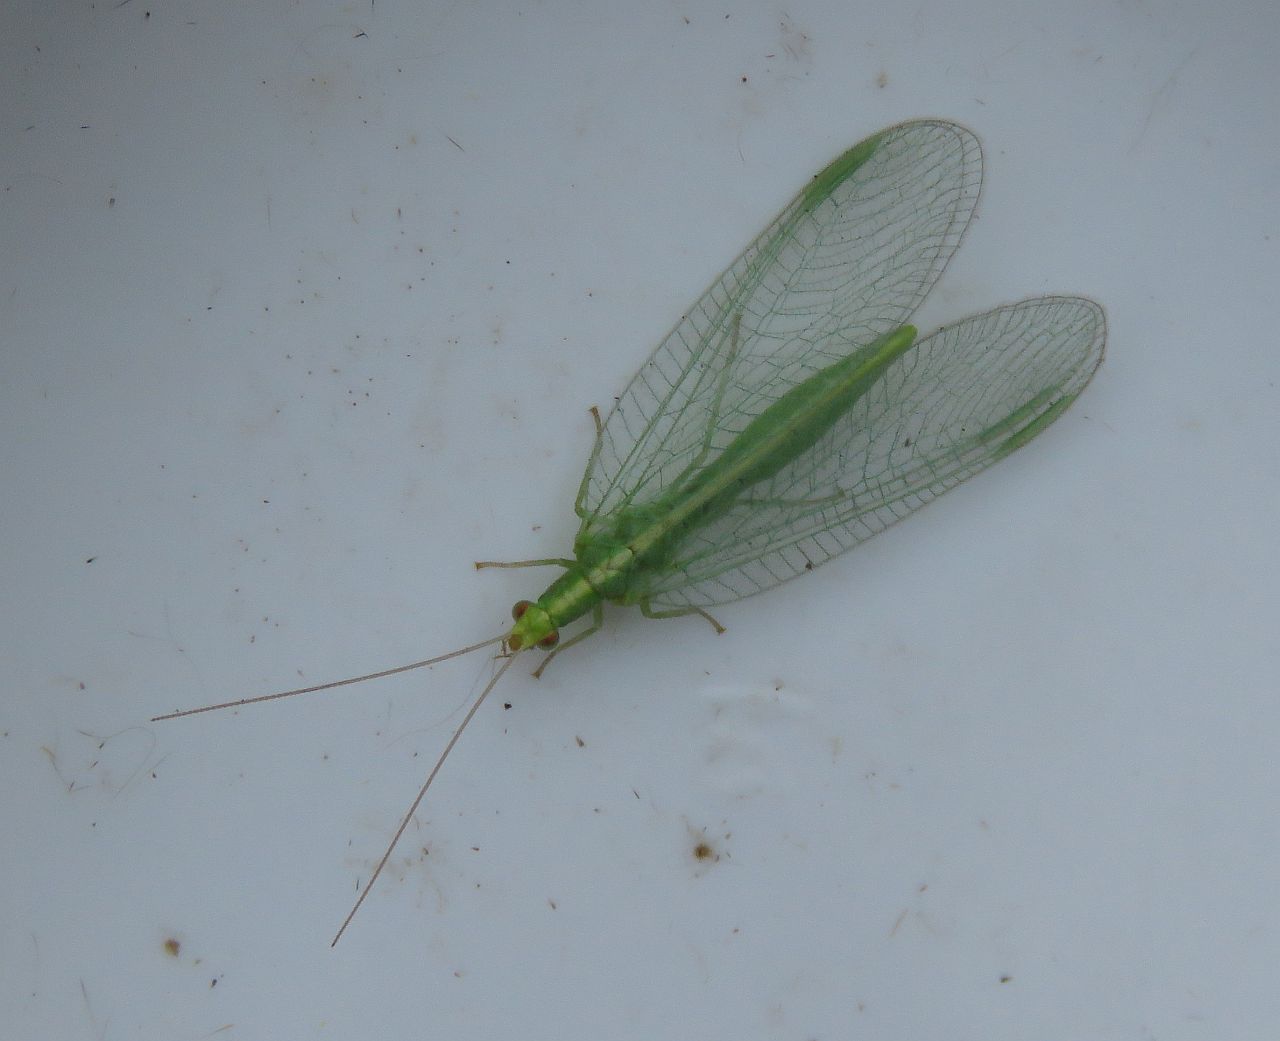  Common Green Lacewing 